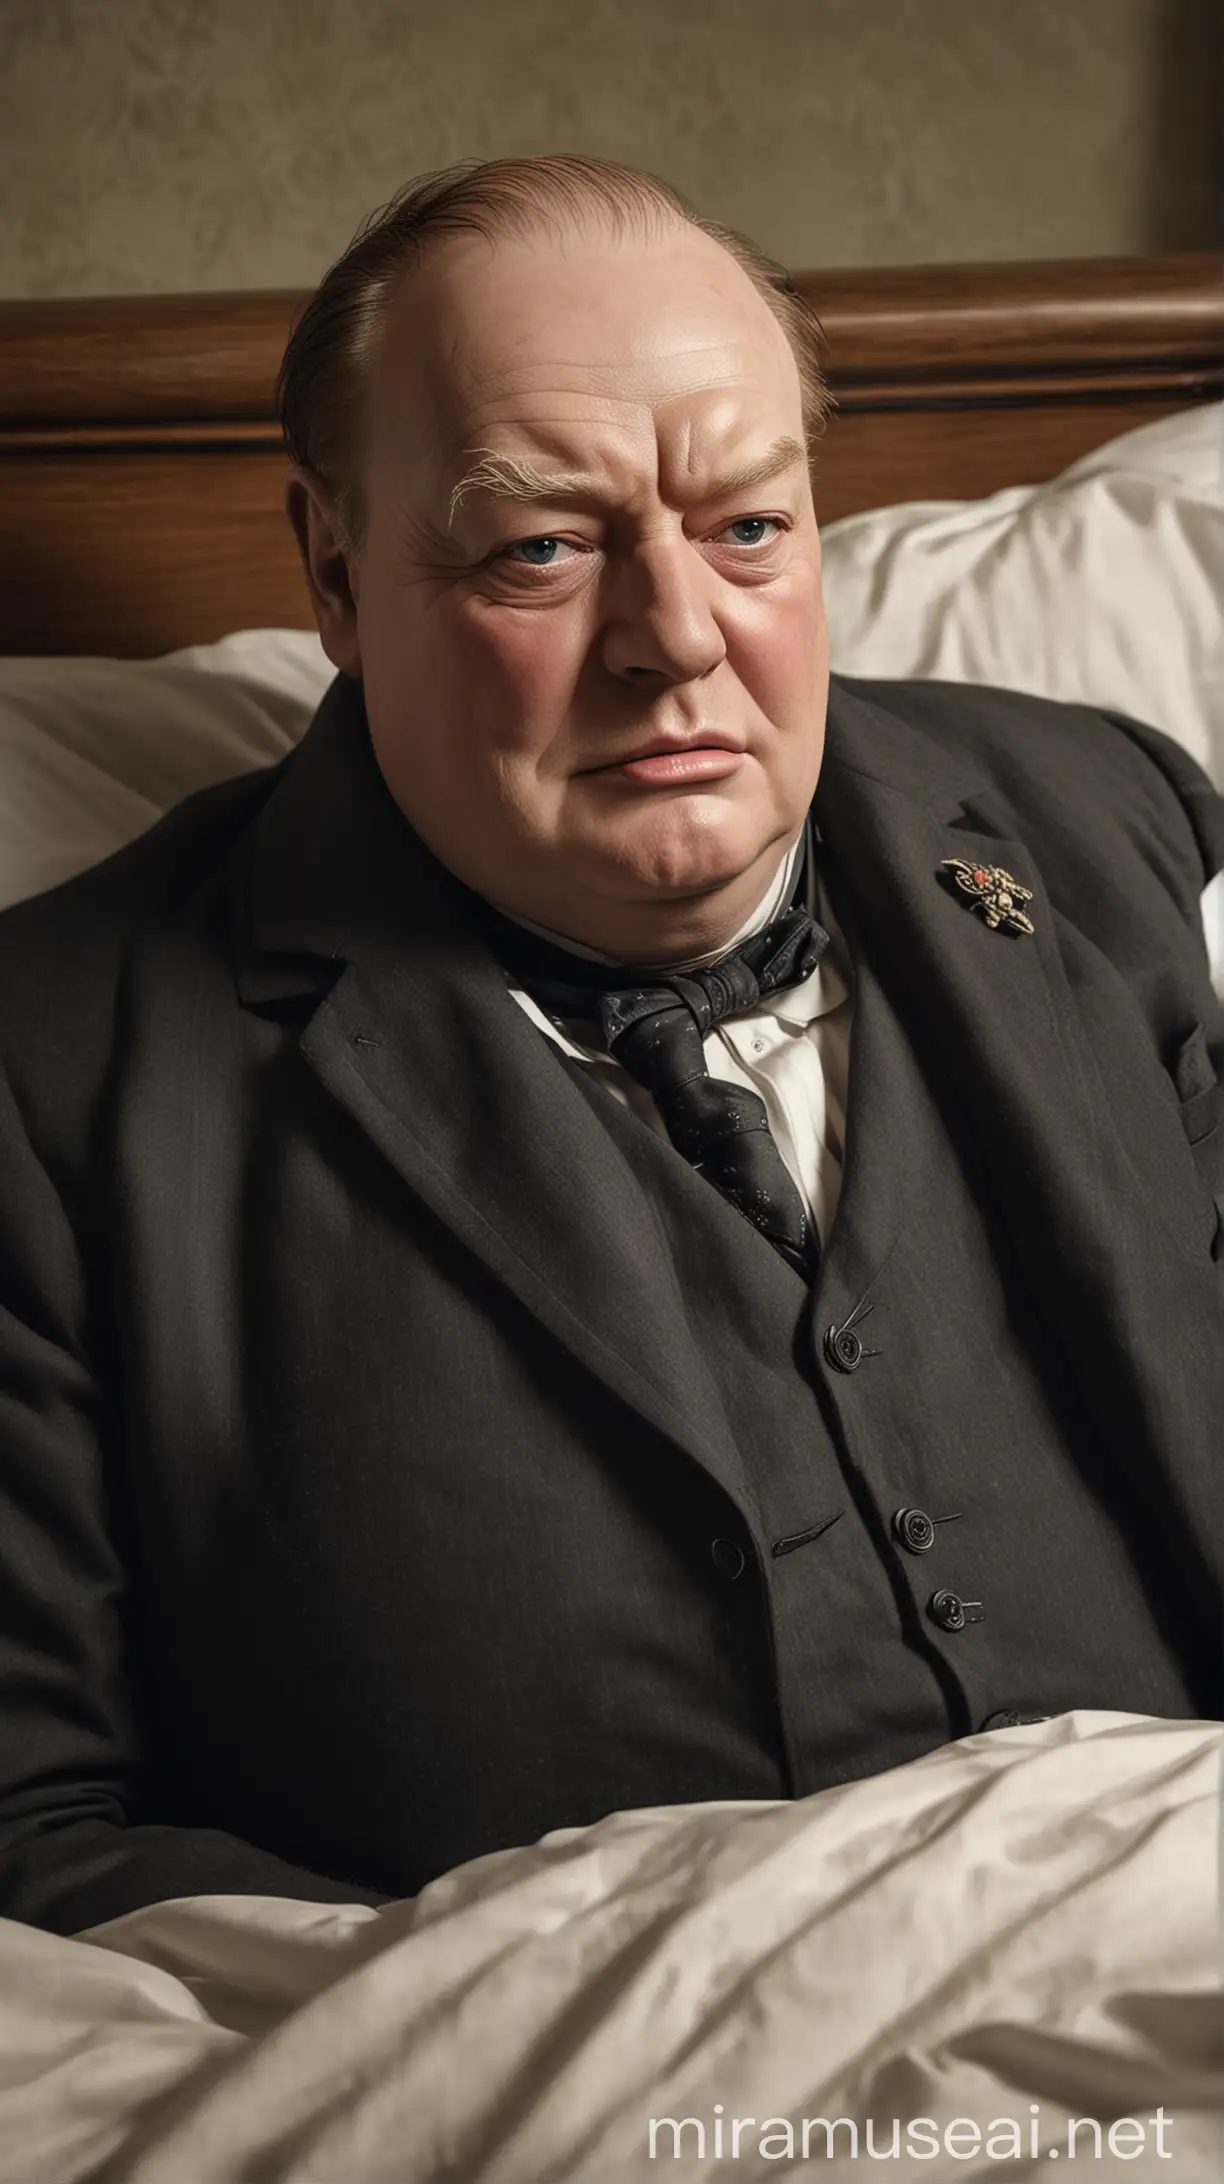 Churchill lying in bed, delivering his final words with a smirk. hyper realistic